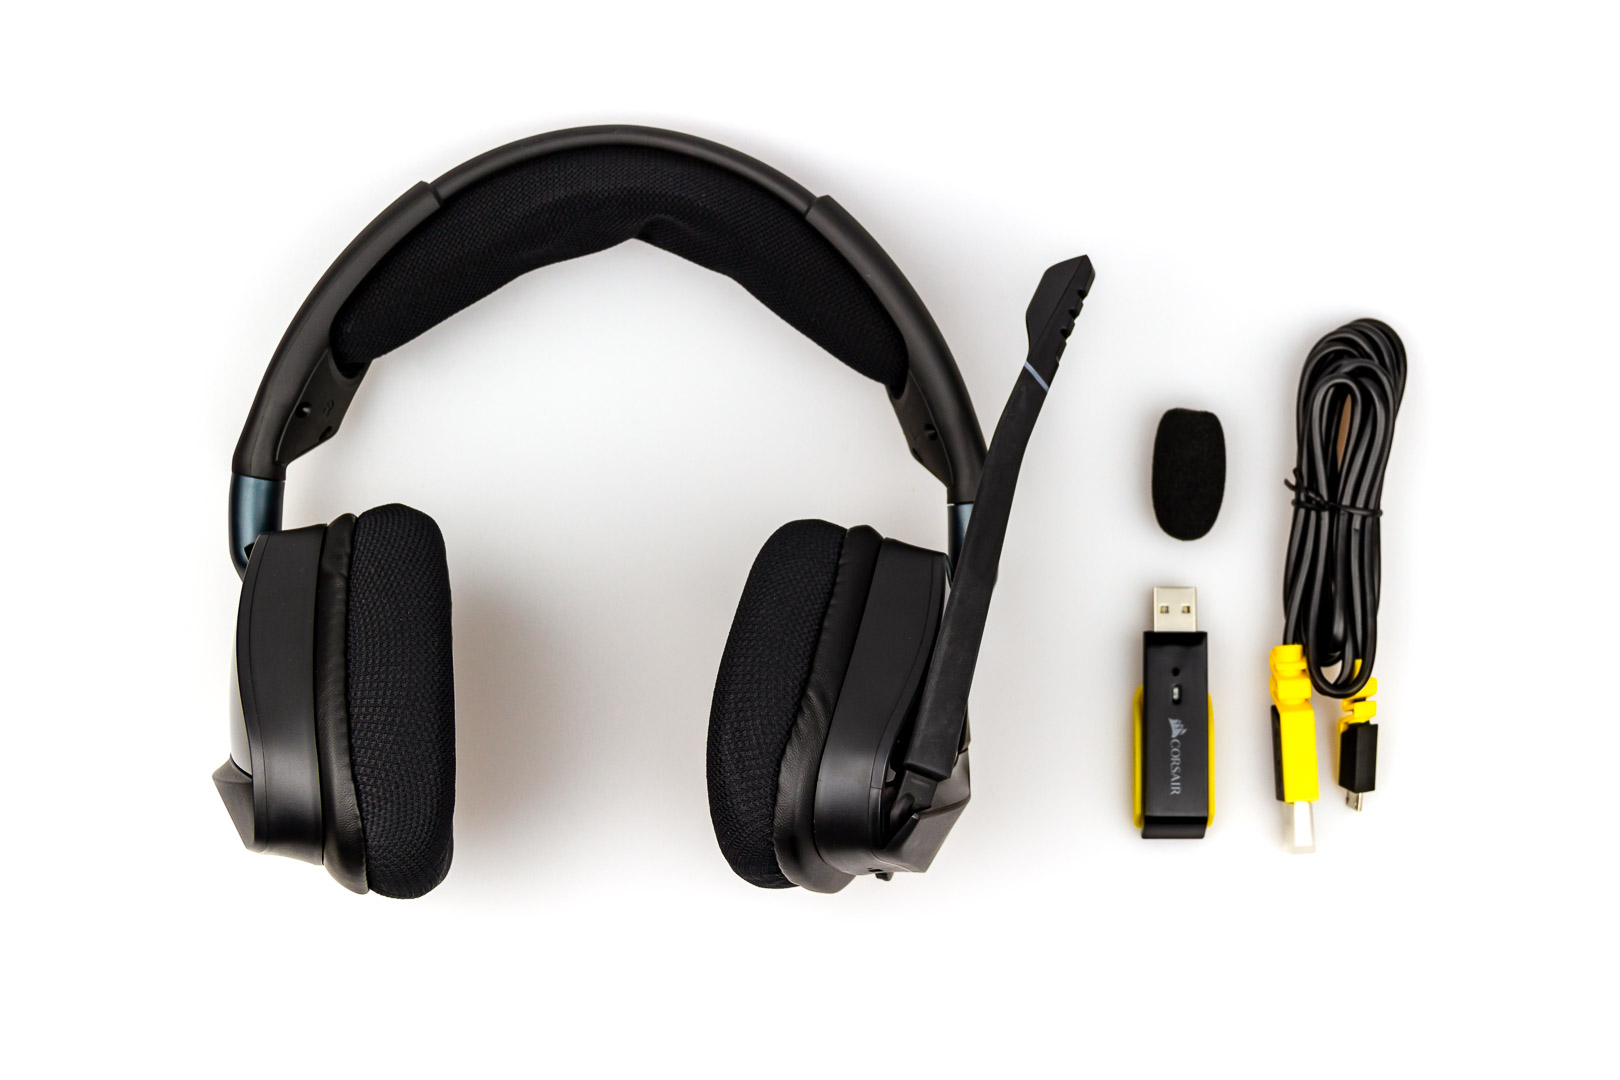 Corsair Wireless Gaming Headset – How To Charge